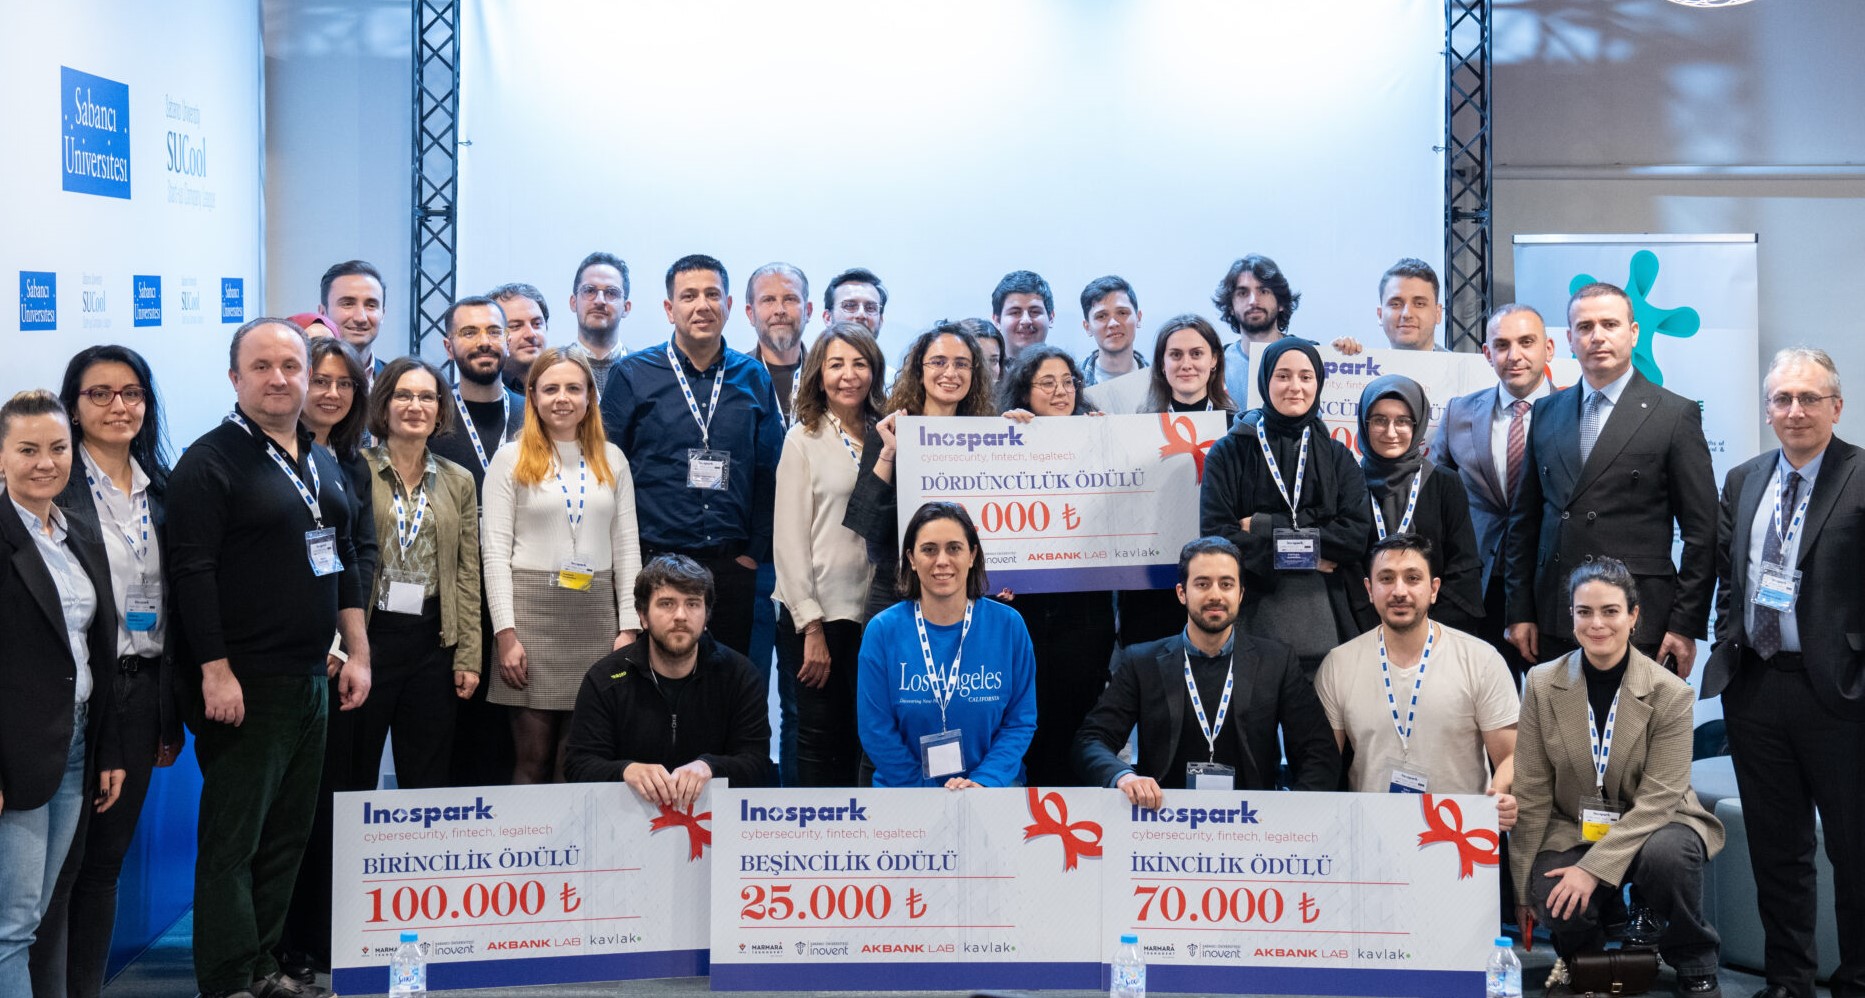 Lecturer Malek Malkawi’s startup secured second place in the Inospark Cybersecurity & Fintech & Legaltech Program